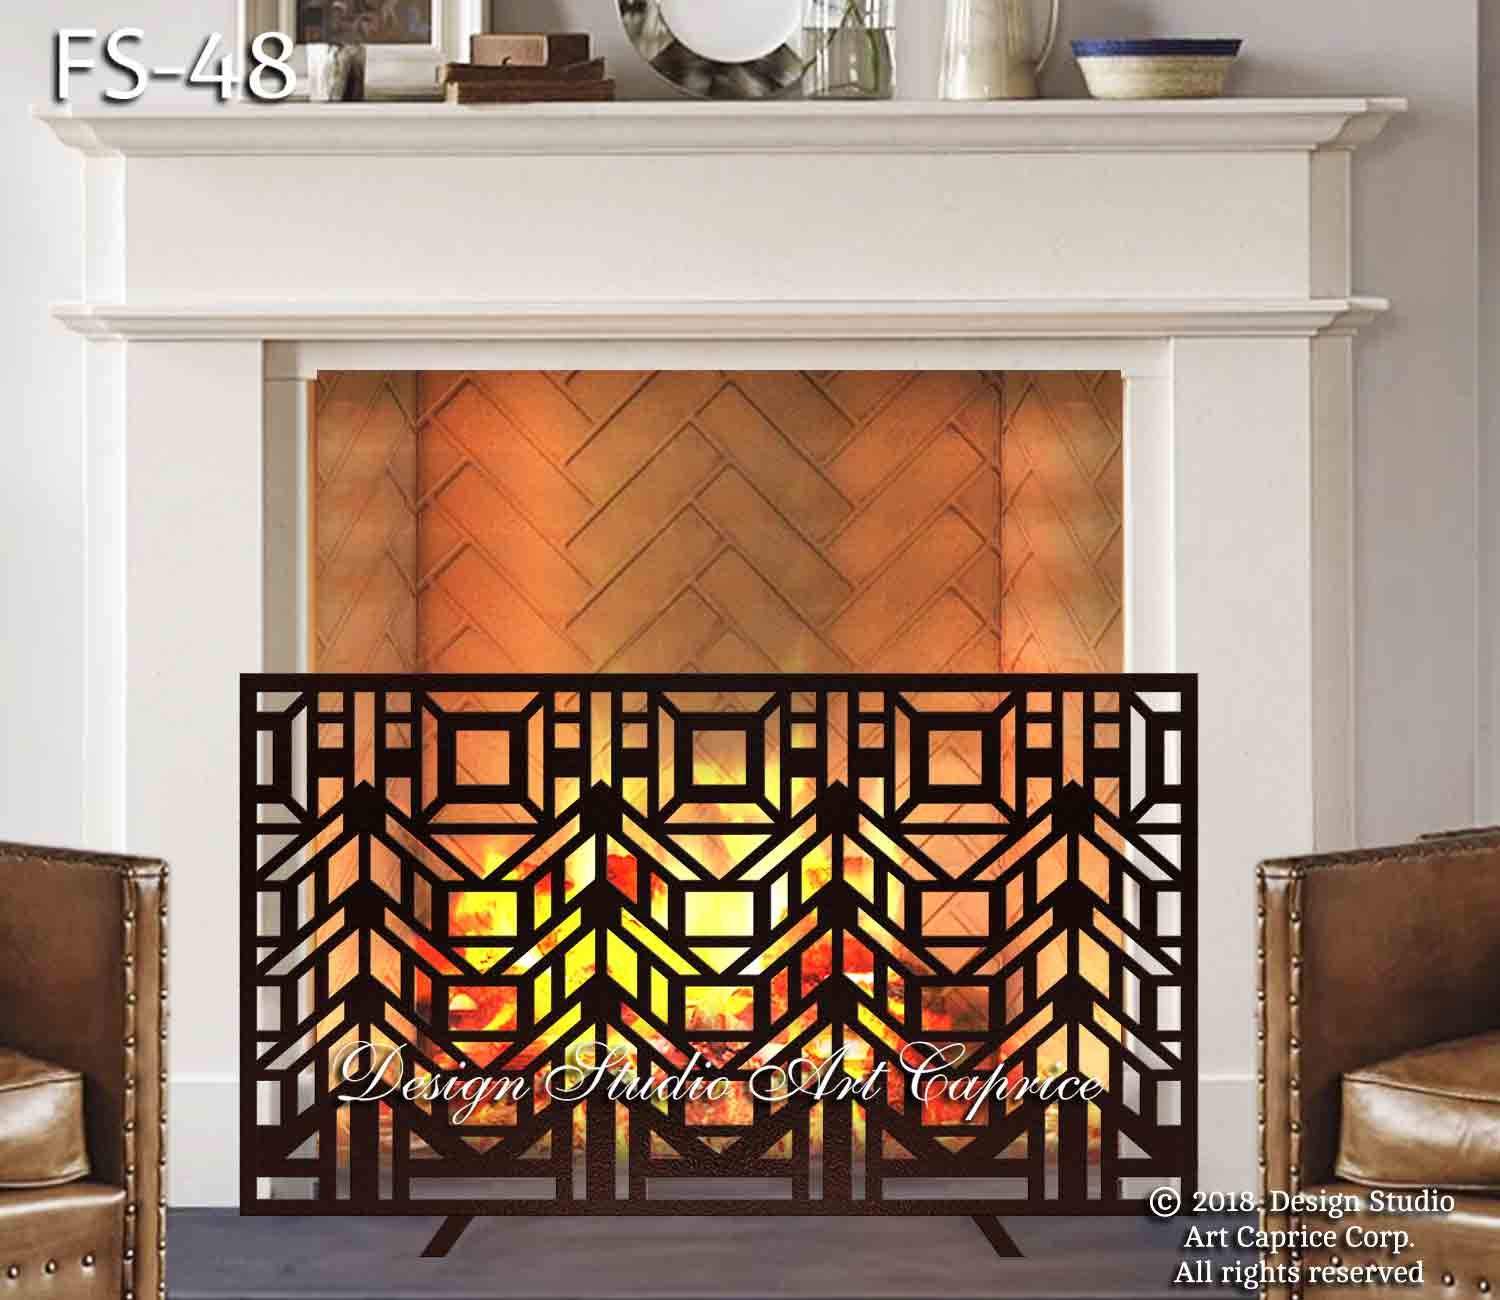 Bronze Fireplace Draft Cover Decorate For Inside Gas Fireplace, Outdoor  Large Fire Screens/ Fireplace Cover For Child Pets Baby Proof, Wrought Iron